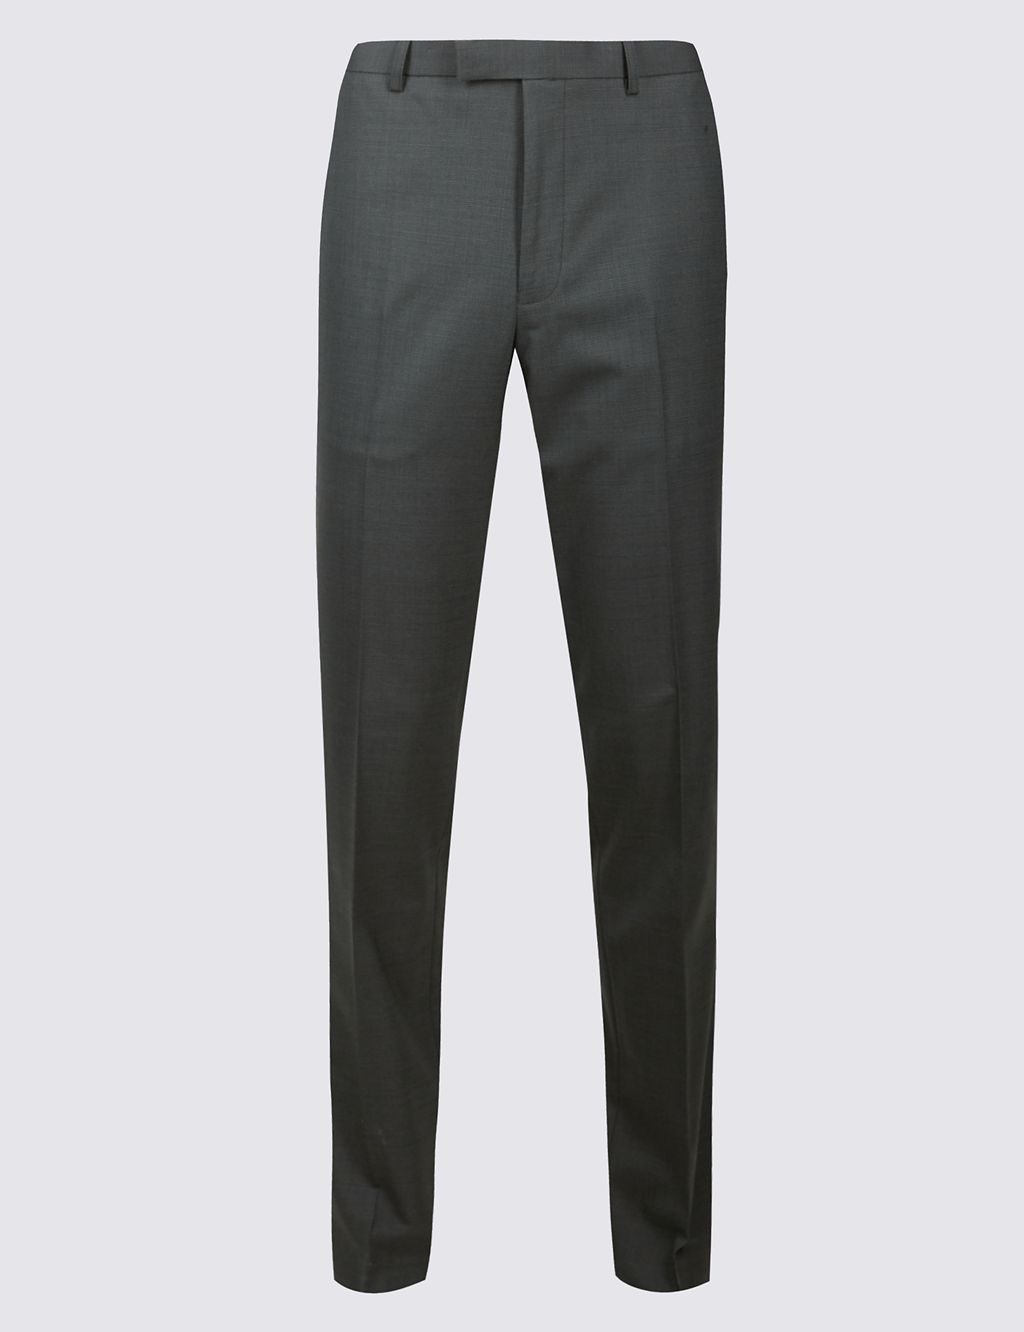 Charcoal Textured Slim Fit Trousers 1 of 6